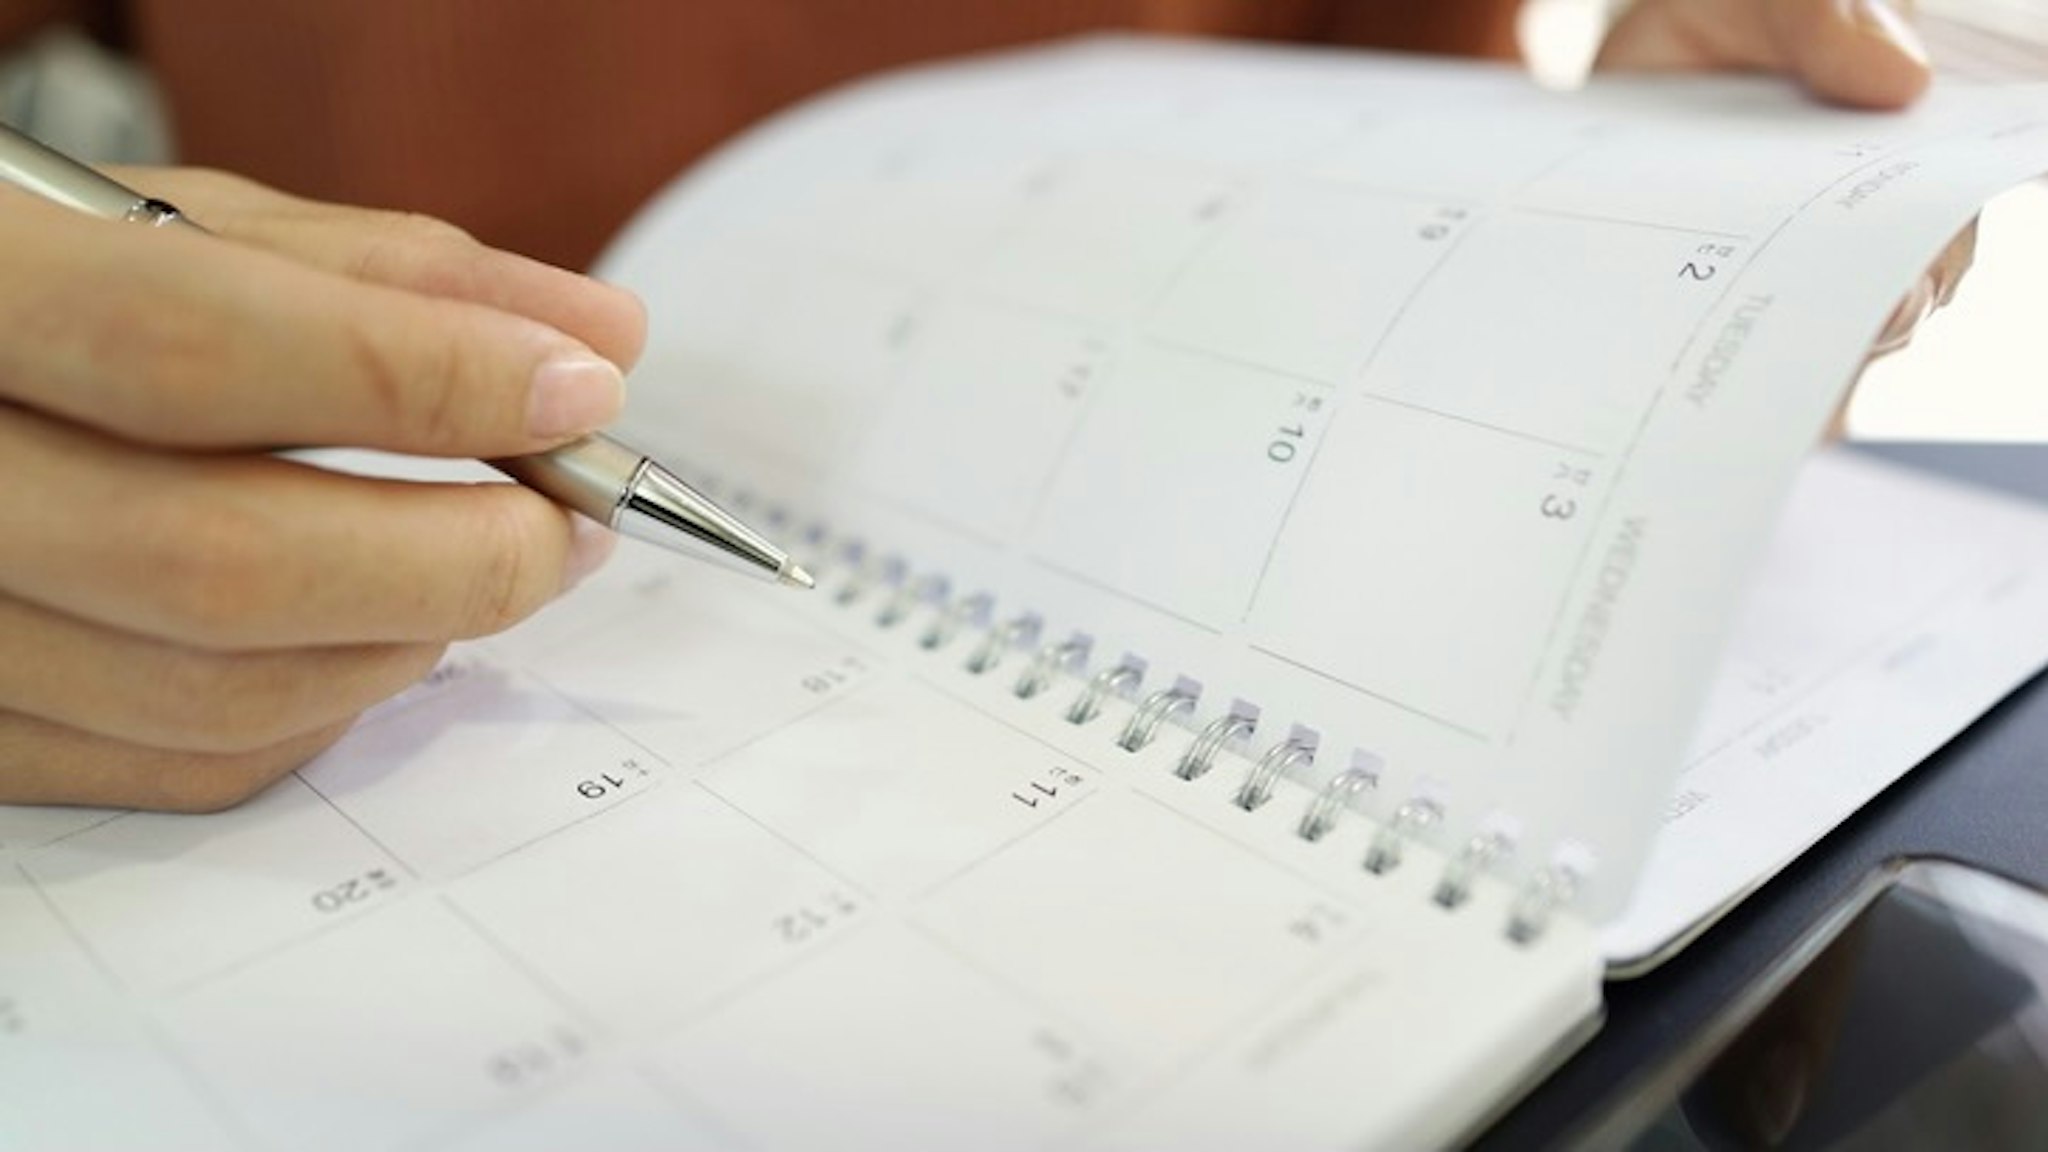 Midsection Of Woman Hand Writing With Pen In Calendar - stock photo Poh Kim Yeoh / EyeEm via Getty Images